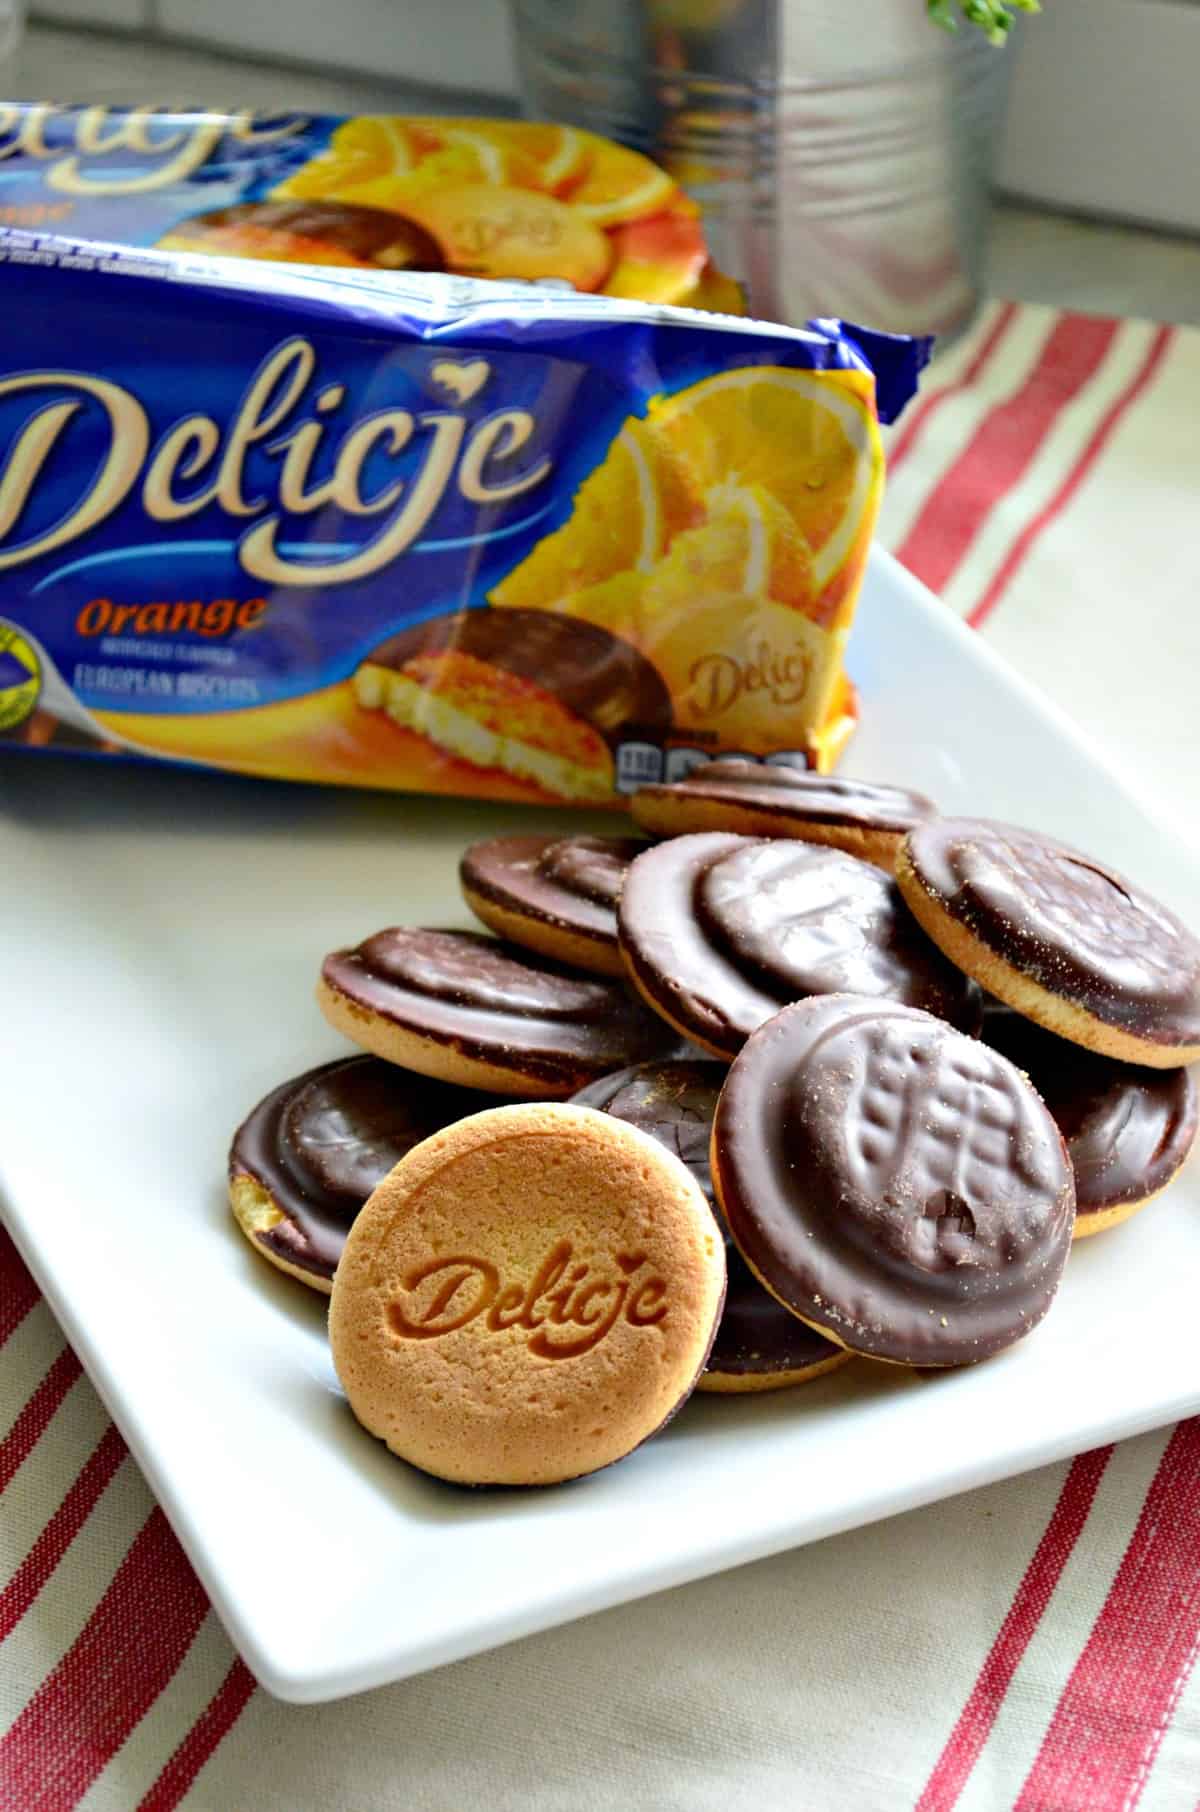 Delicje Polish Cookies on the counter in front of packaging.